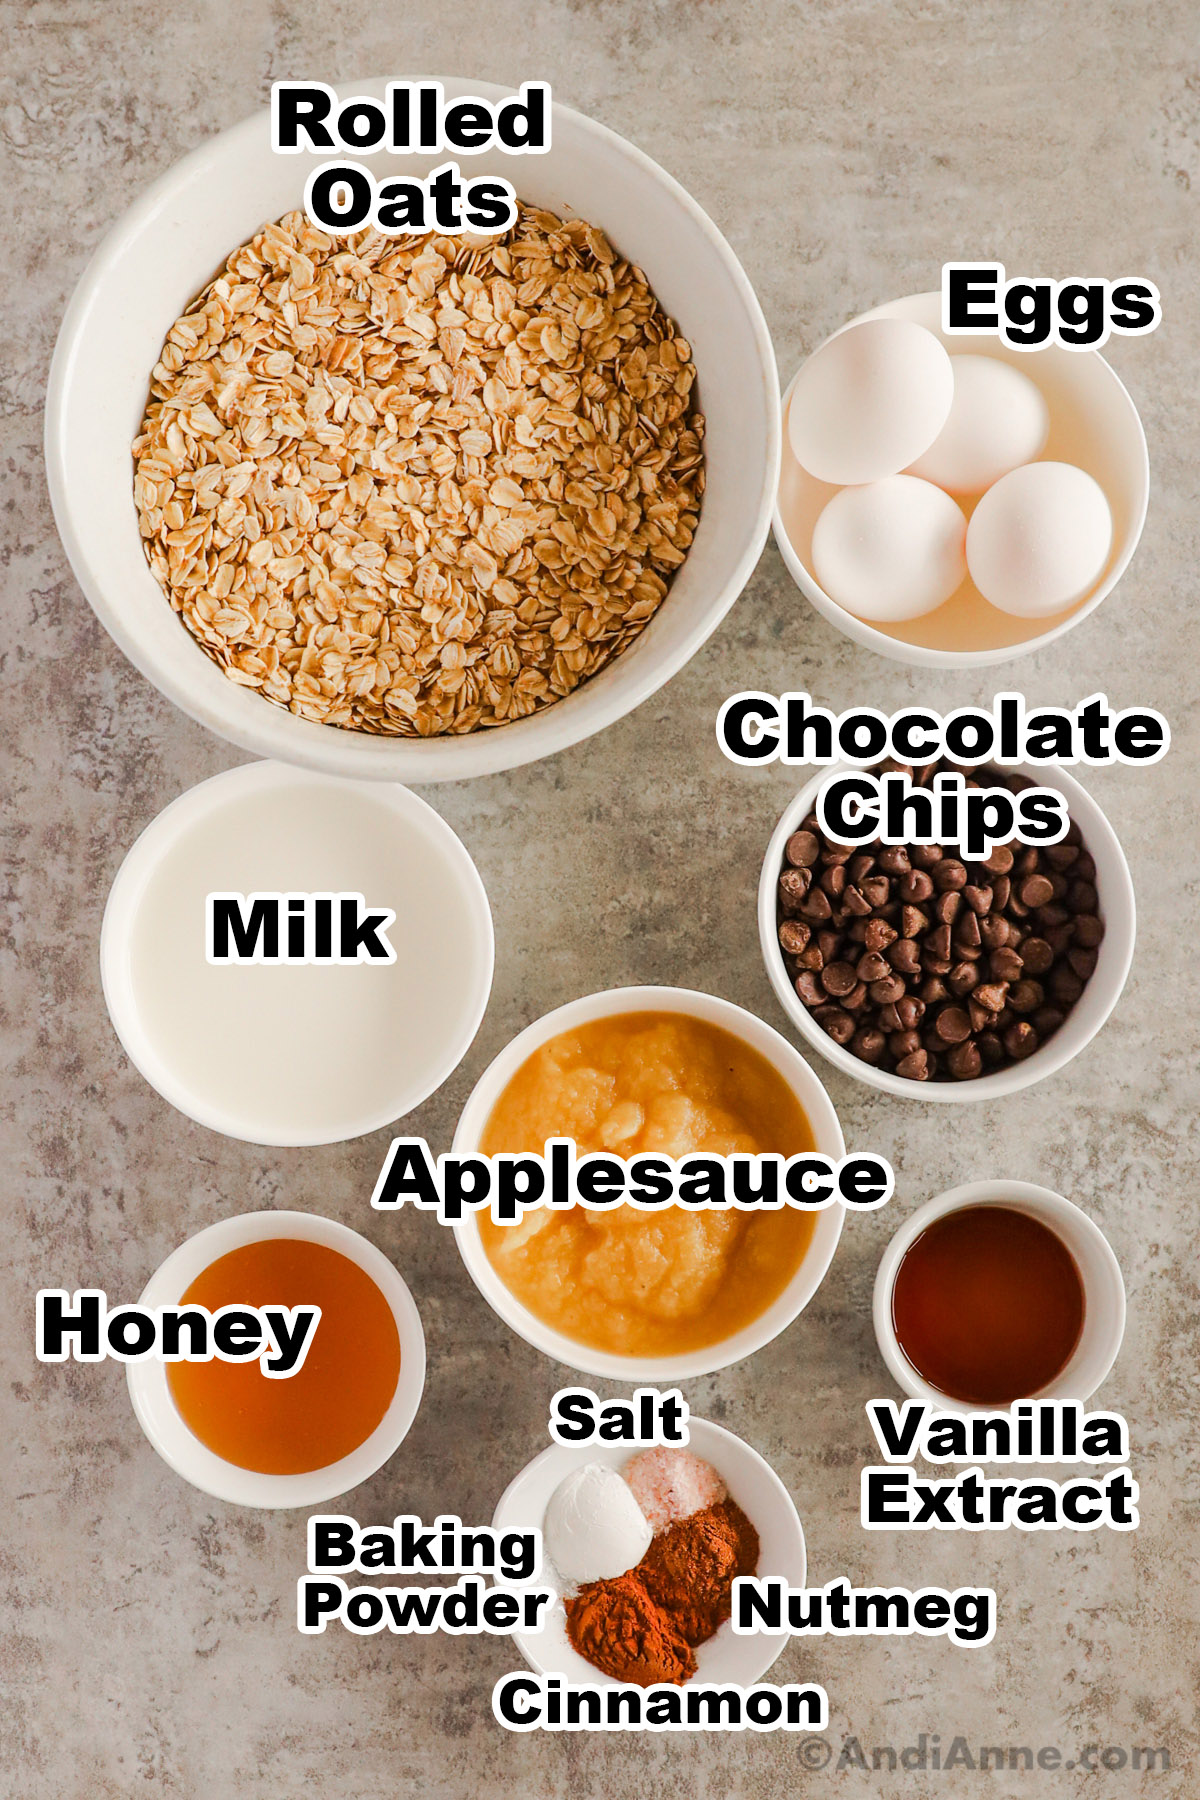 Recipe ingredients in bowls including rolled oats, eggs, milk, chocolate chips, applesauce, honey, vanilla and spices.